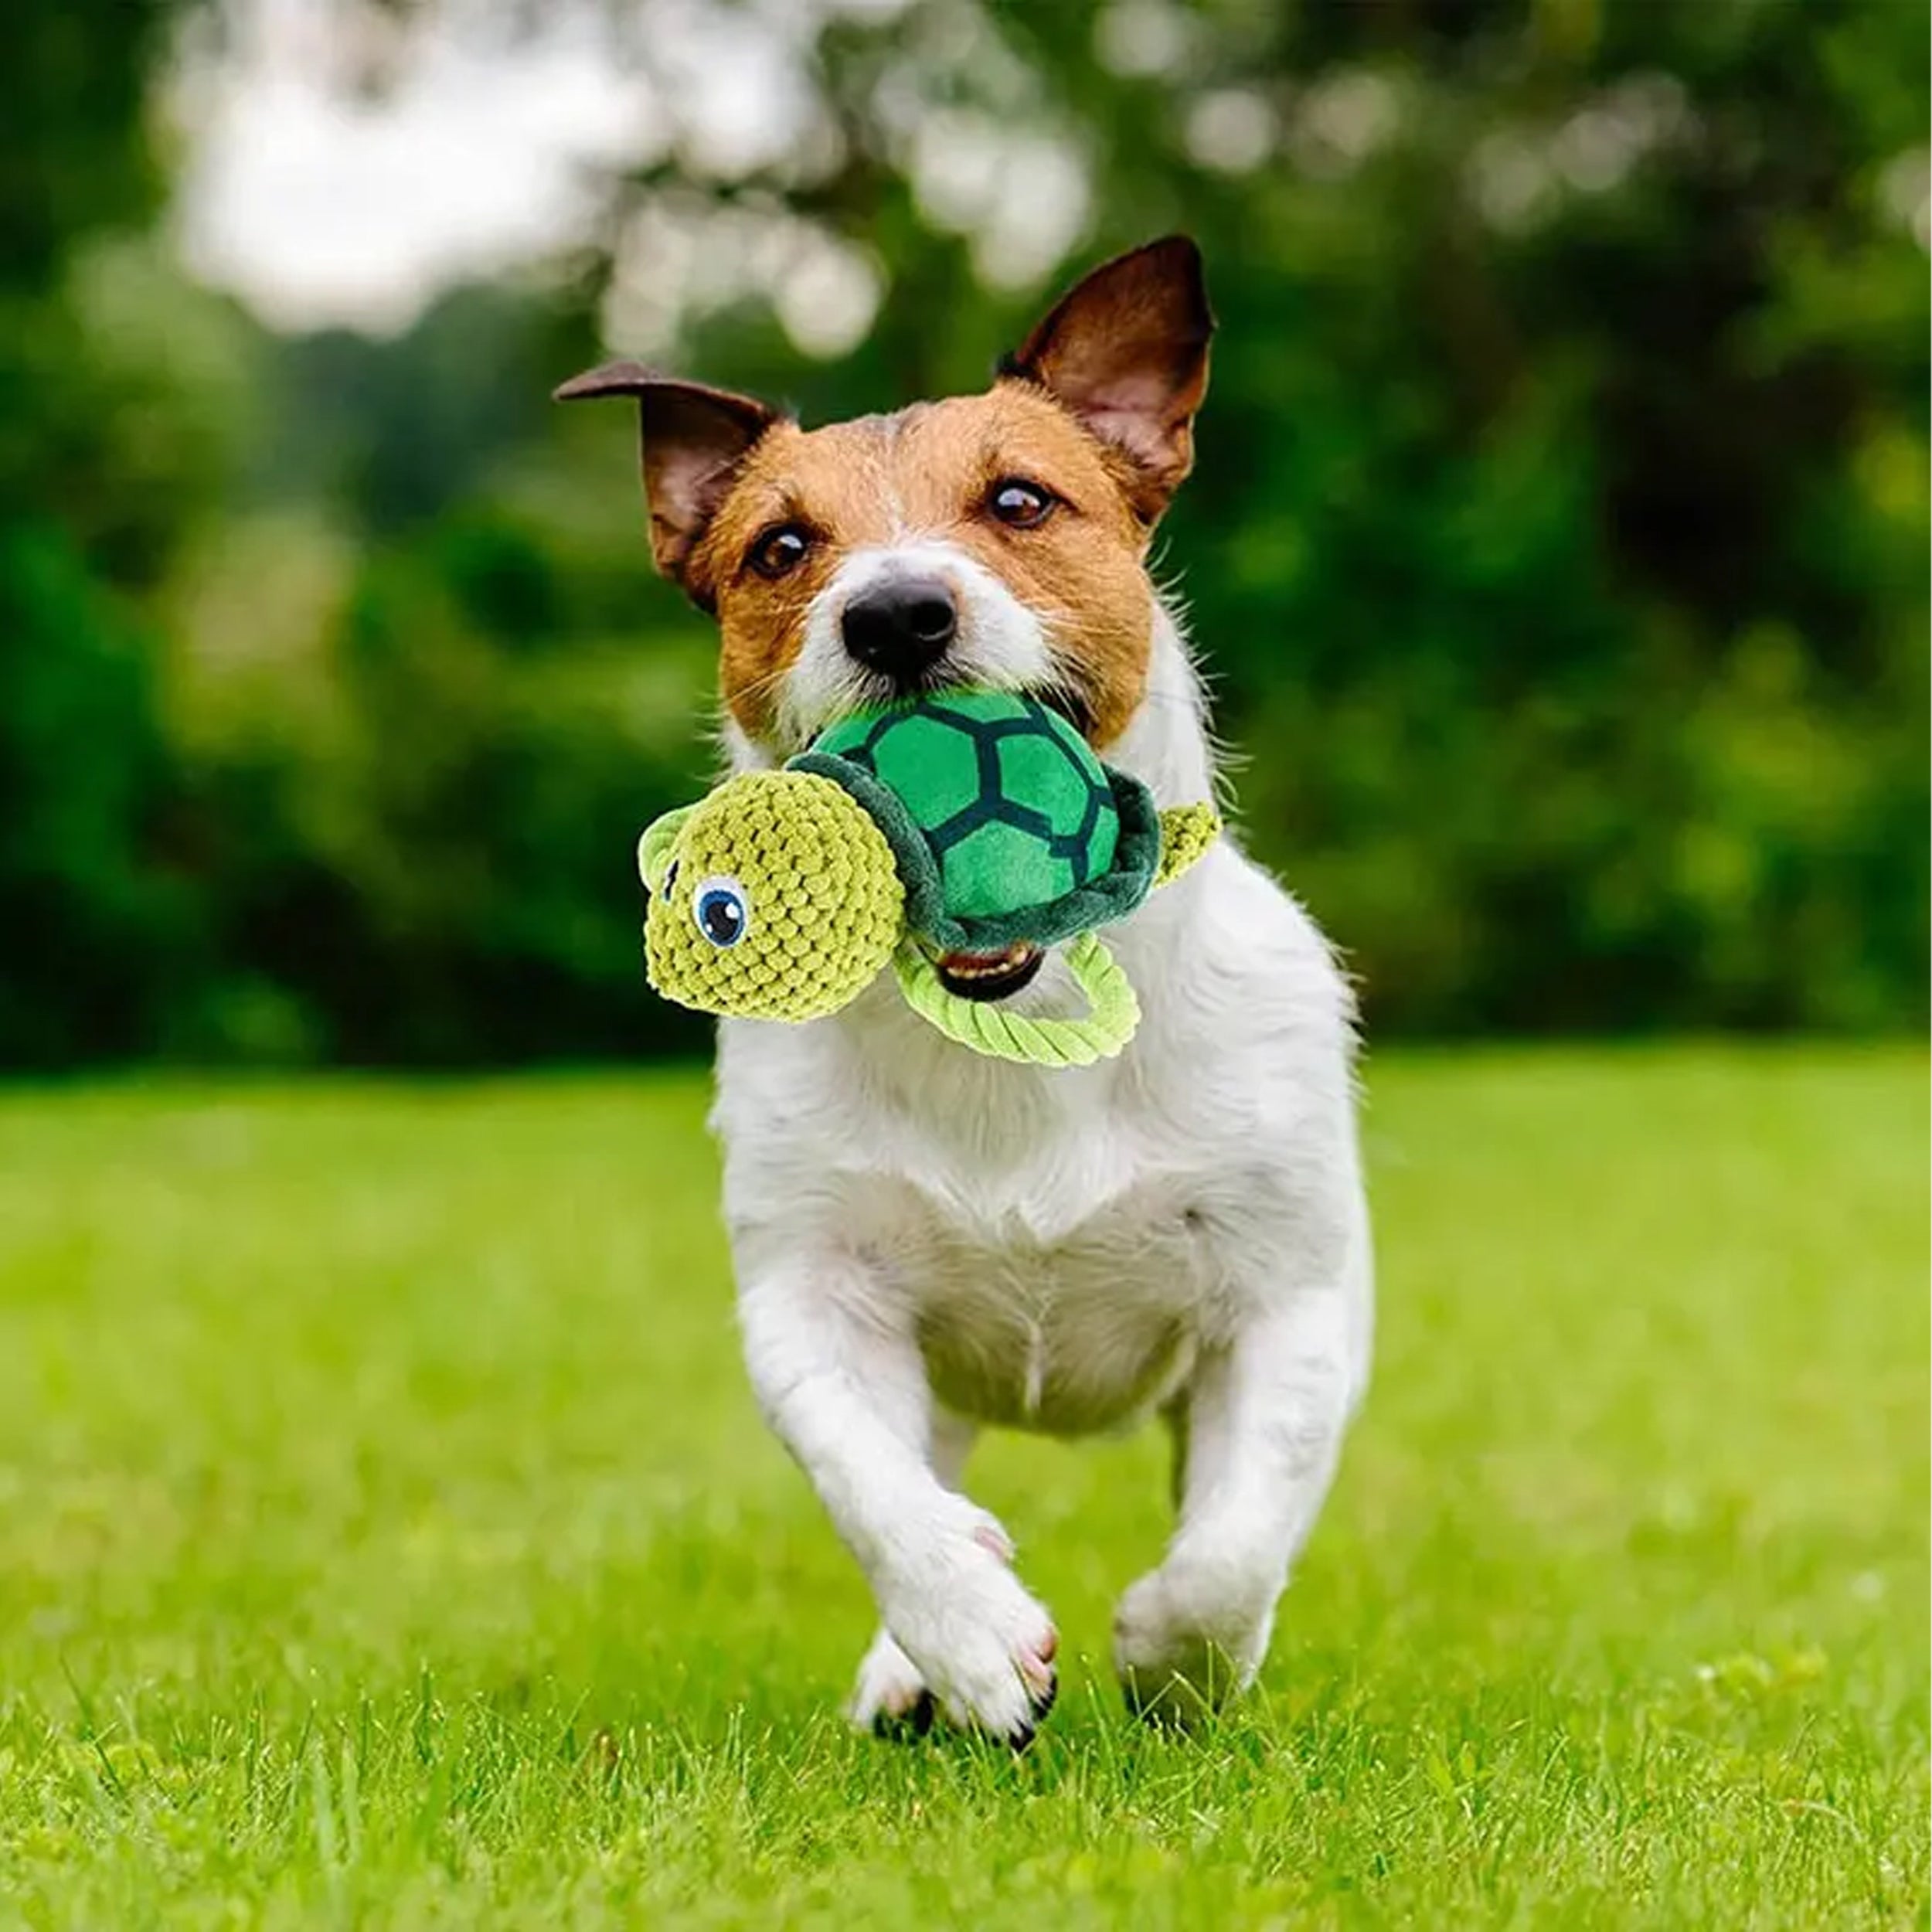 Turtle Pet Supplies - Vocal Bite-Resistant Stuffed Squeaky Dog Chew Toy for Endless Playtime Fun